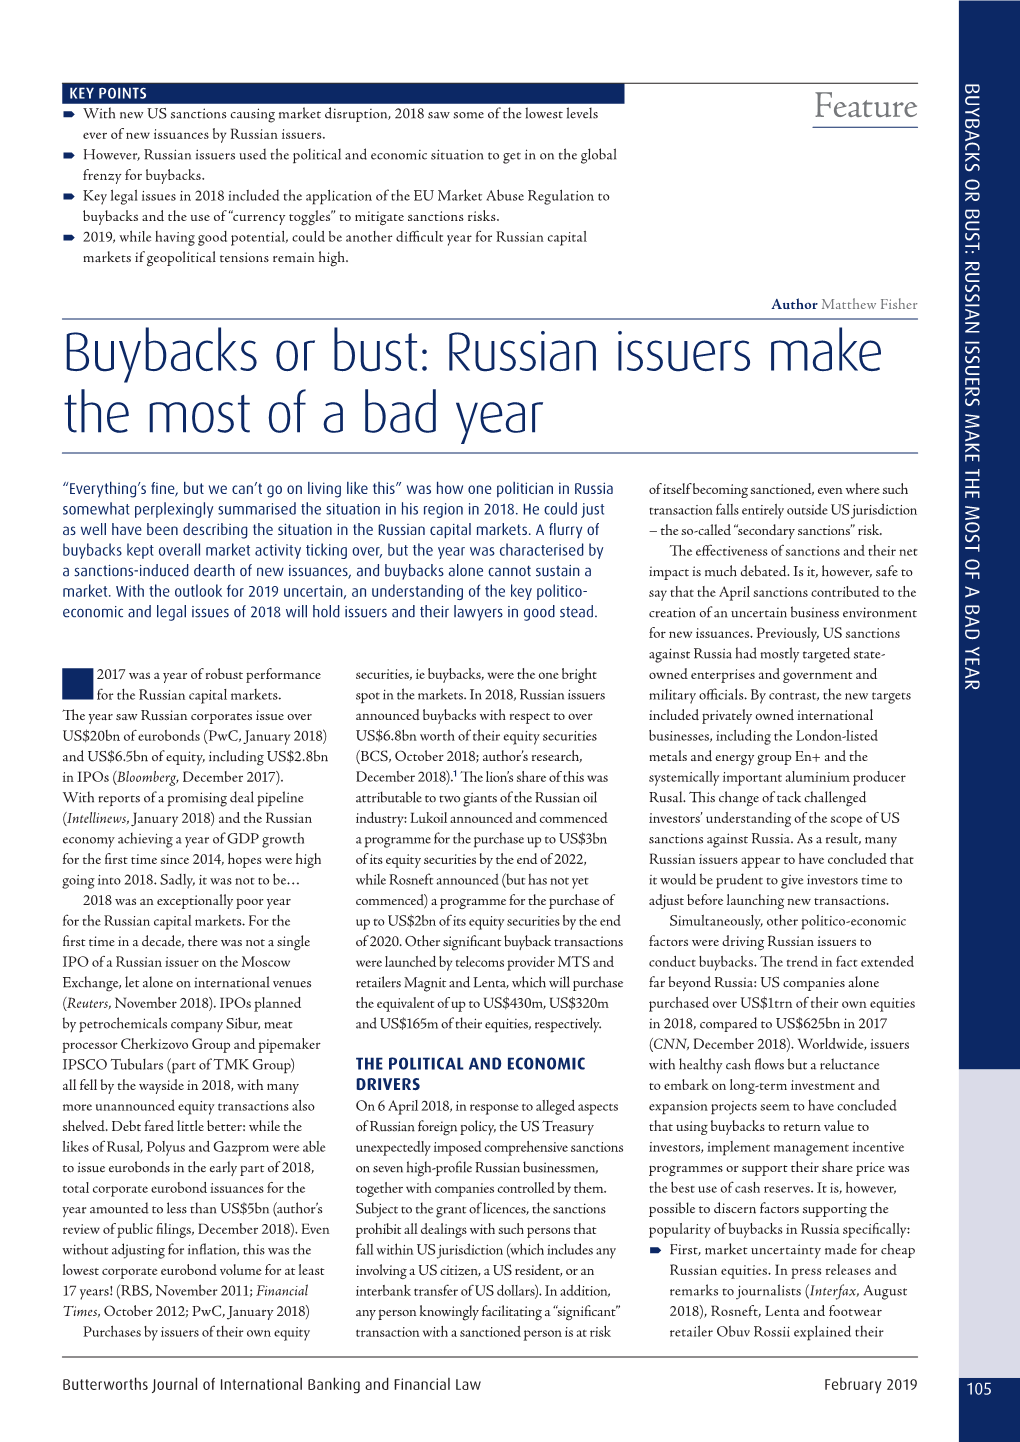 Buybacks Or Bust: Russian Issuers Make the Most of a Bad Year